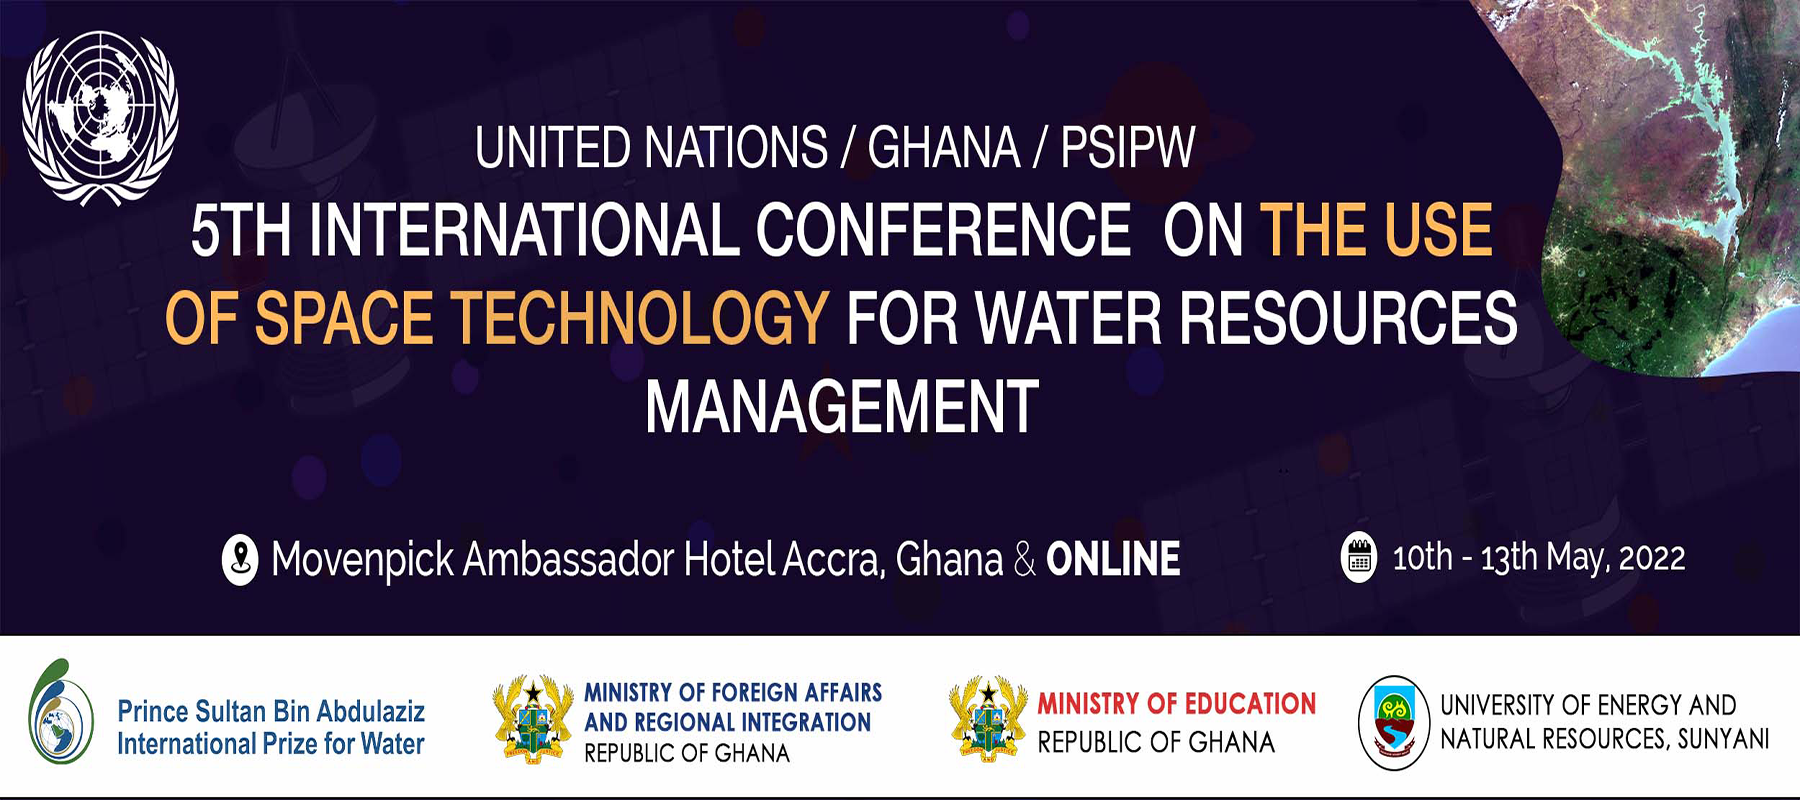 5th International Conference on the Use of Space Technology for Water Resources Management